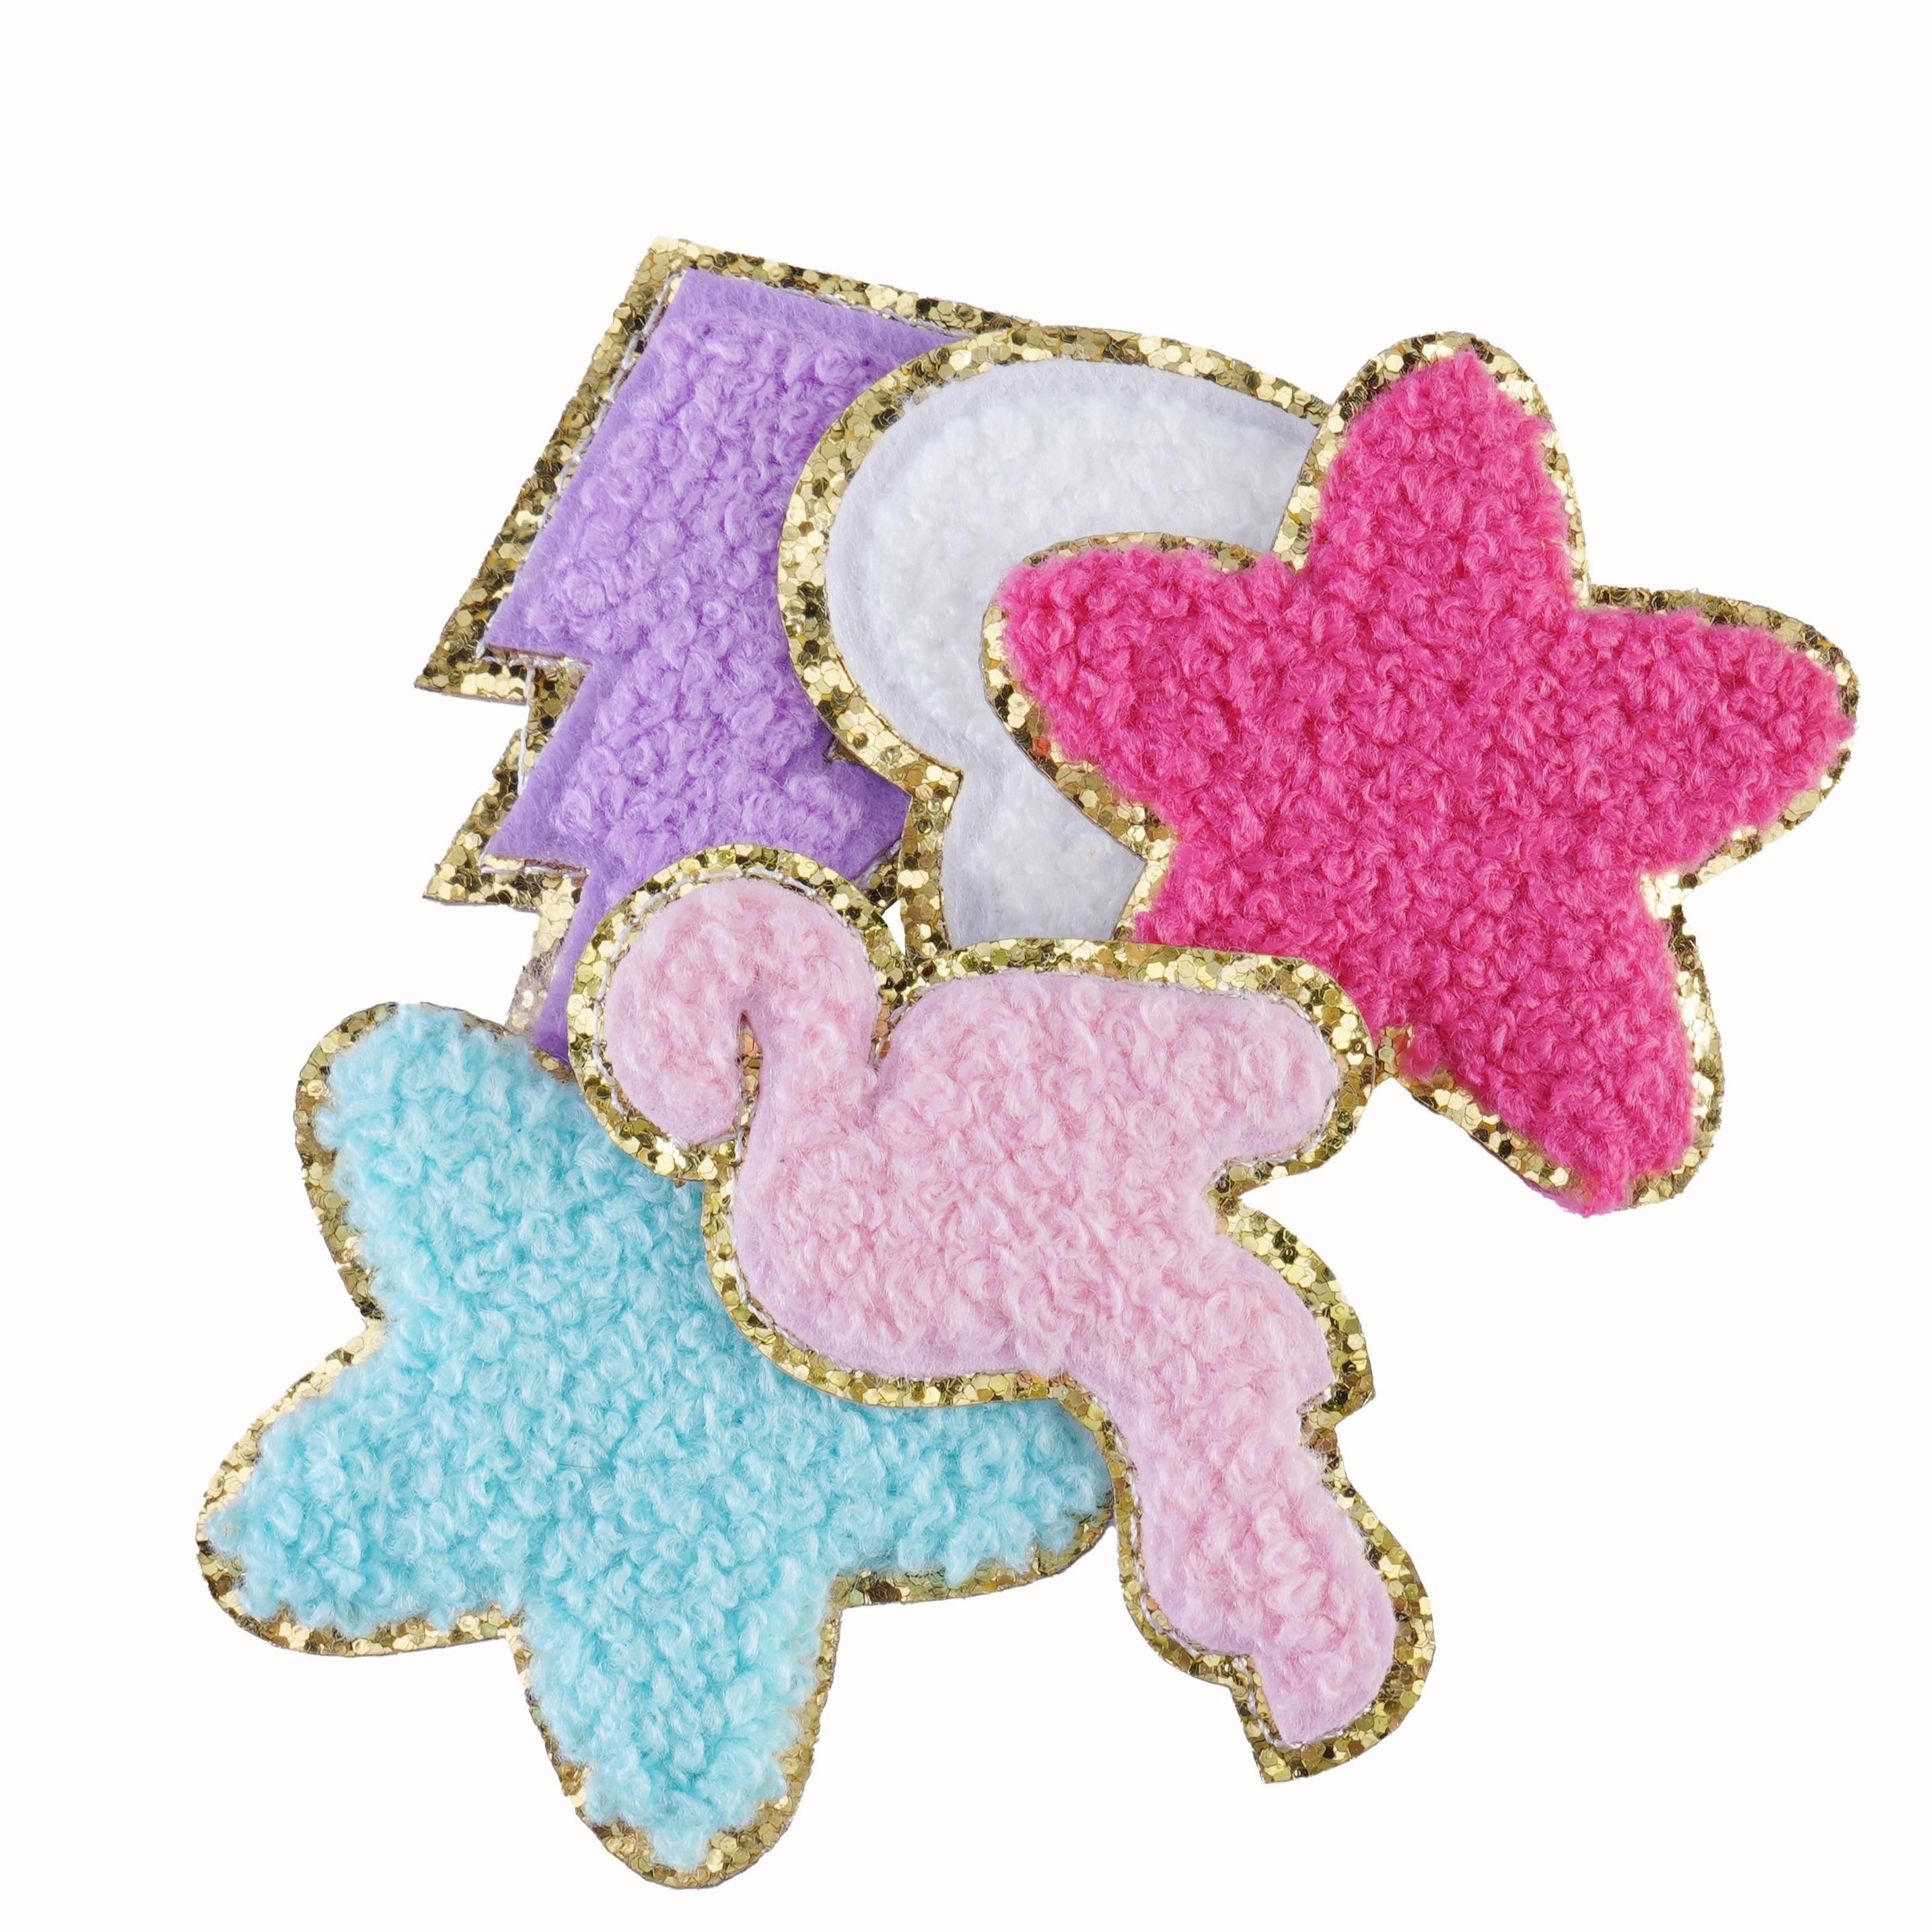 20pcs Chenille Cross Patches Easter Colorful Kids Iron on Patches Cross Applique with Glitters Border Embroidered Patches Sew on Applique Easter DIY